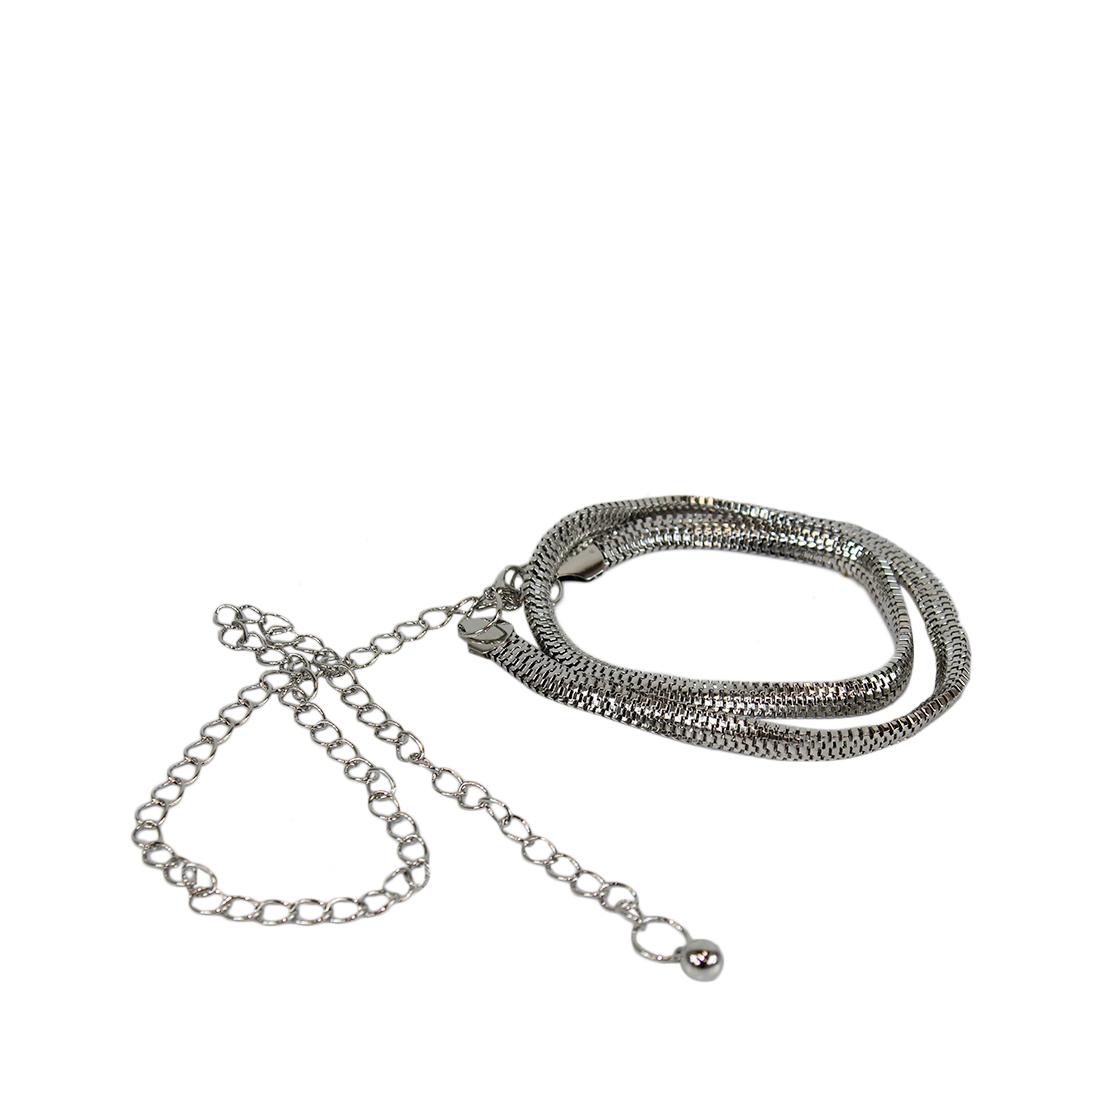 * Chain Strap with adjustable Hook